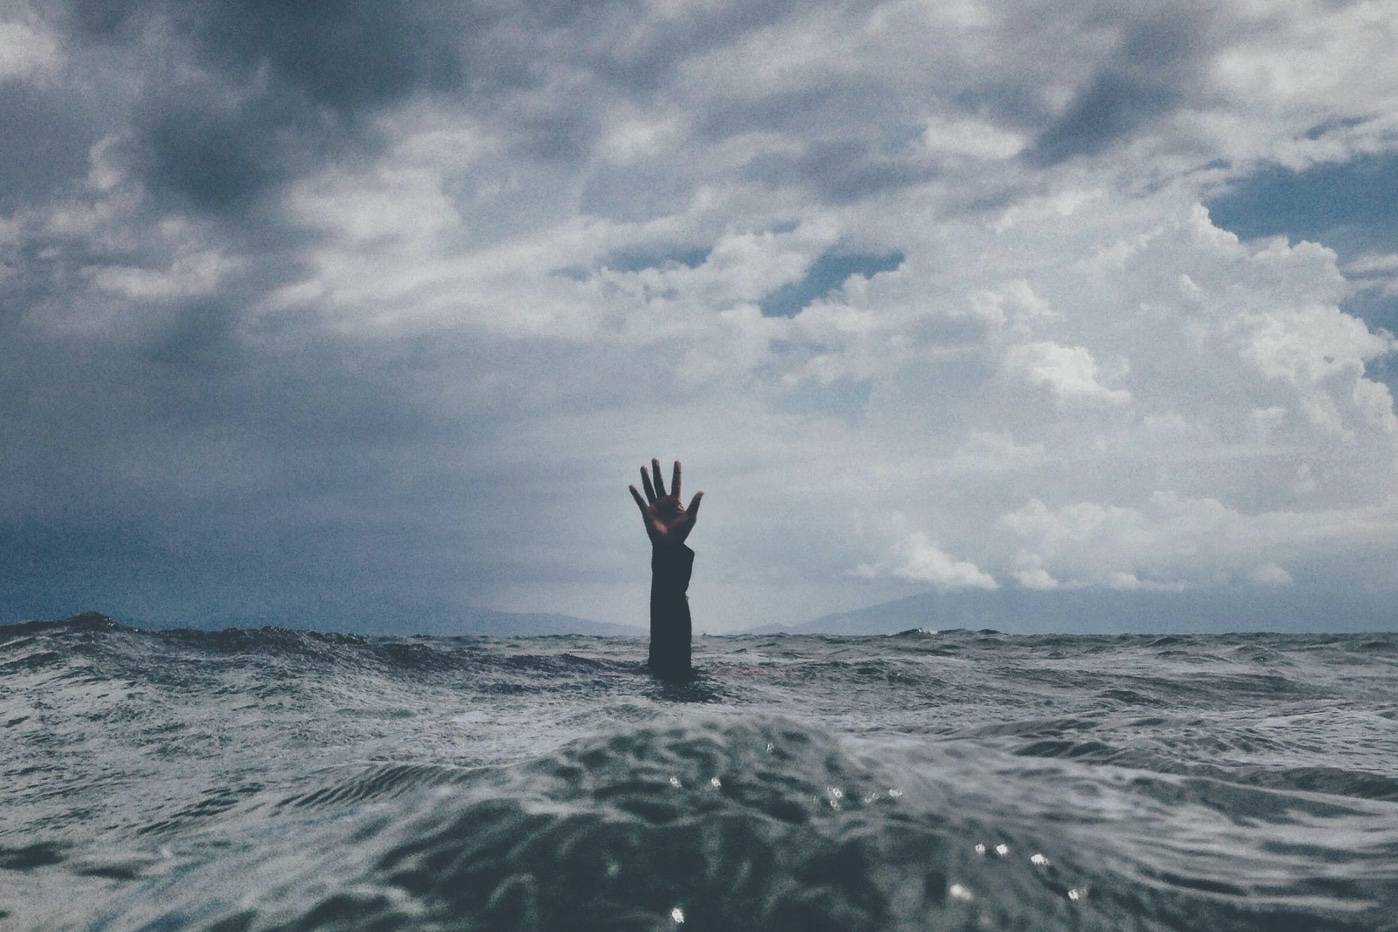  Drowning in Chronic Pain